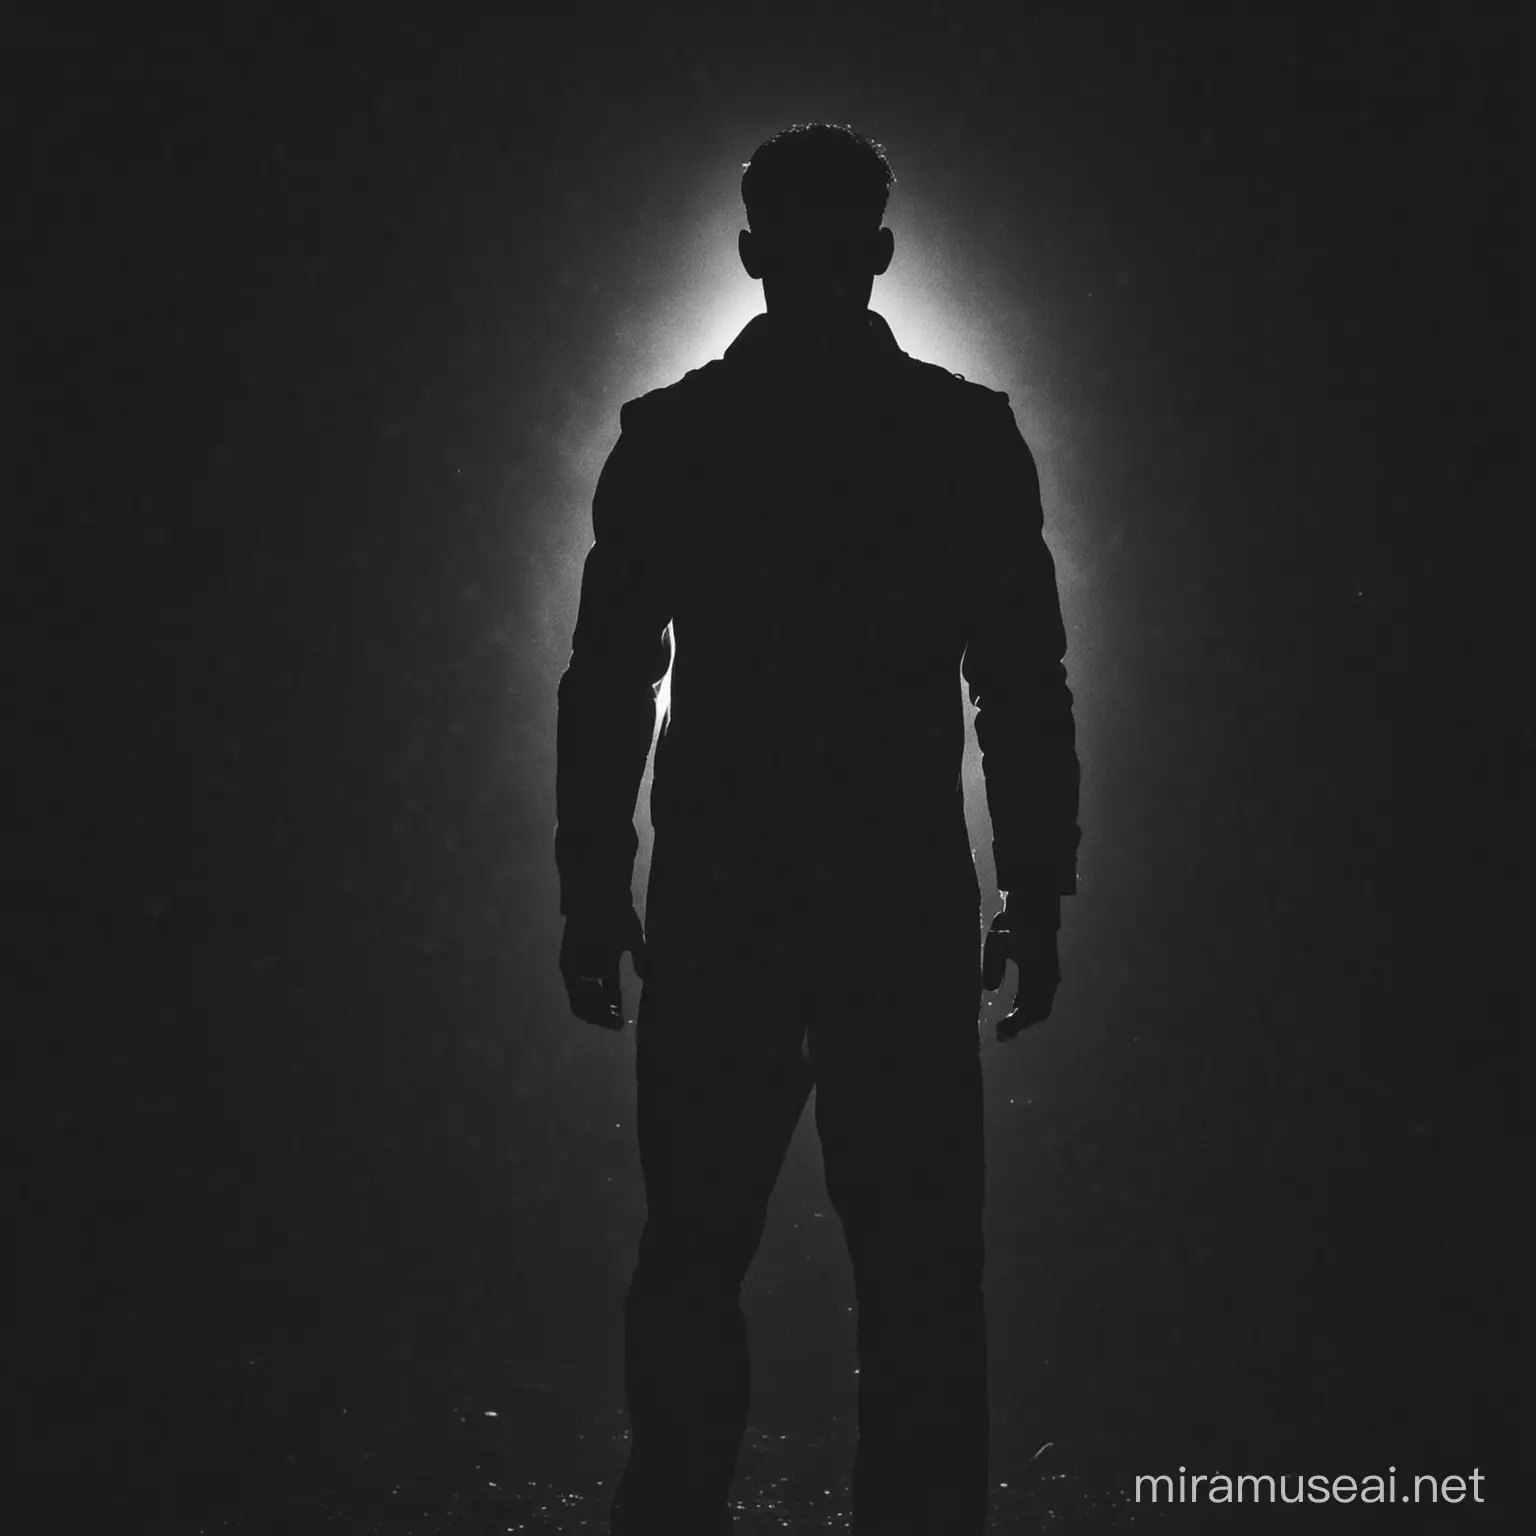 Silhouette of a Man in the Darkness